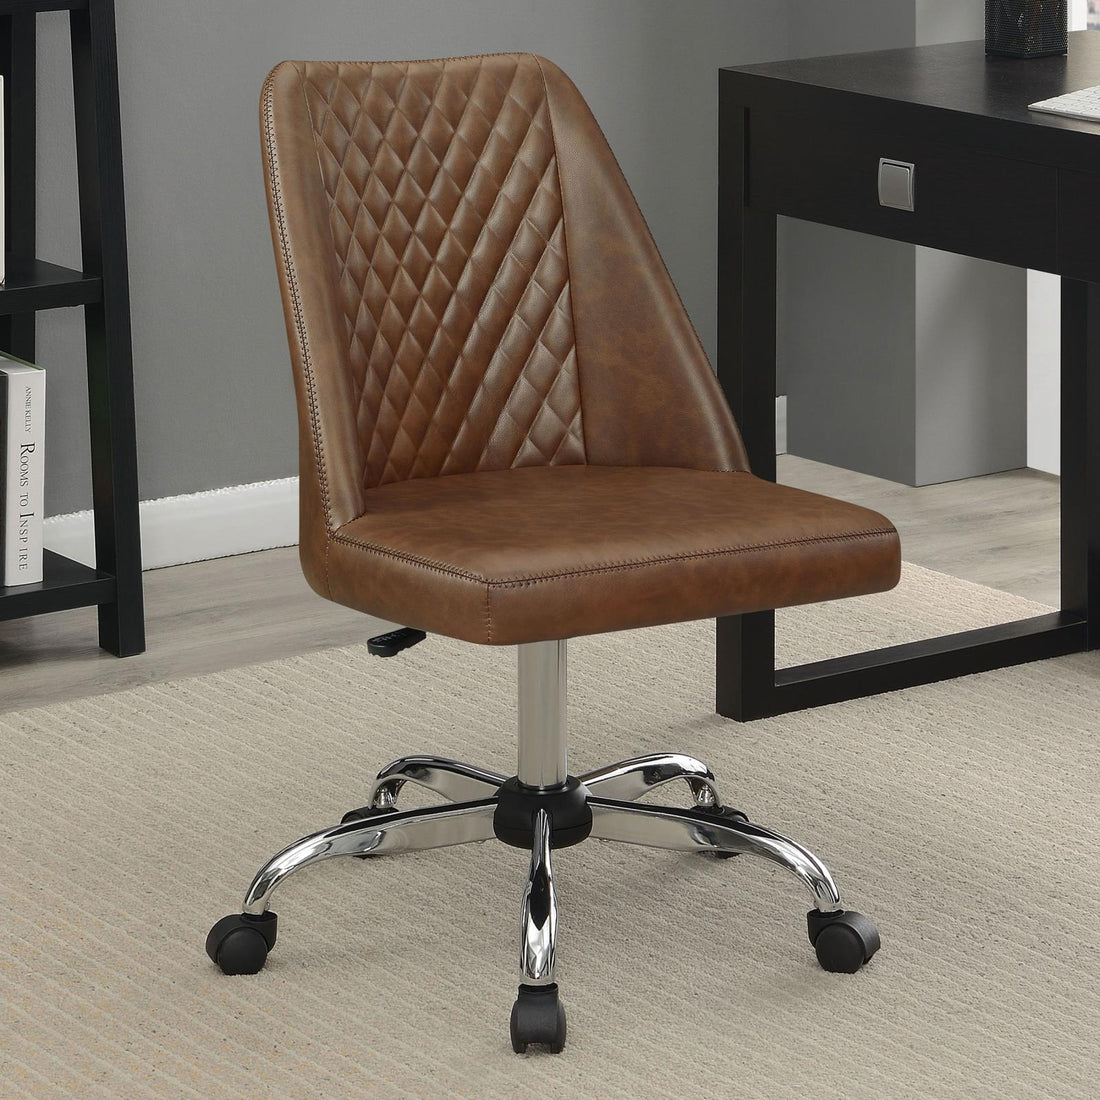 Althea Brown/Chrome Upholstered Tufted Back Office Chair - 881197 - Bien Home Furniture &amp; Electronics